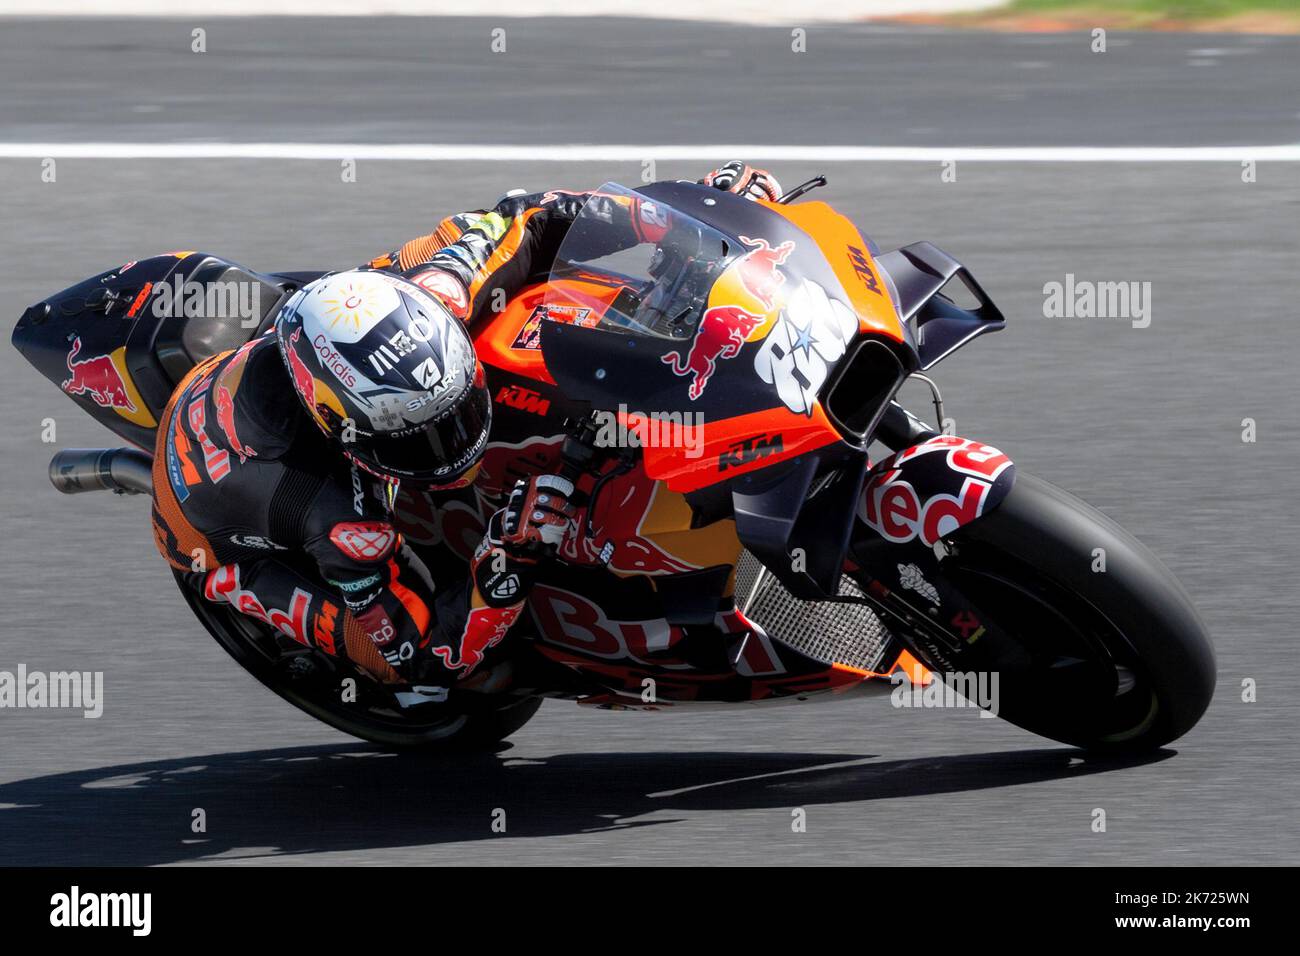 Phillip Island, Australia, 16 October, 2022. Miguel Oliveira of Portugal on the Red Bull KTM Factory Racing KTM during MotoGP race at The 2022 Australian MotoGP at The Phillip Island Circuit on October 16, 2022 in Phillip Island, Australia.  Credit: Dave Hewison/Alamy Live News Stock Photo